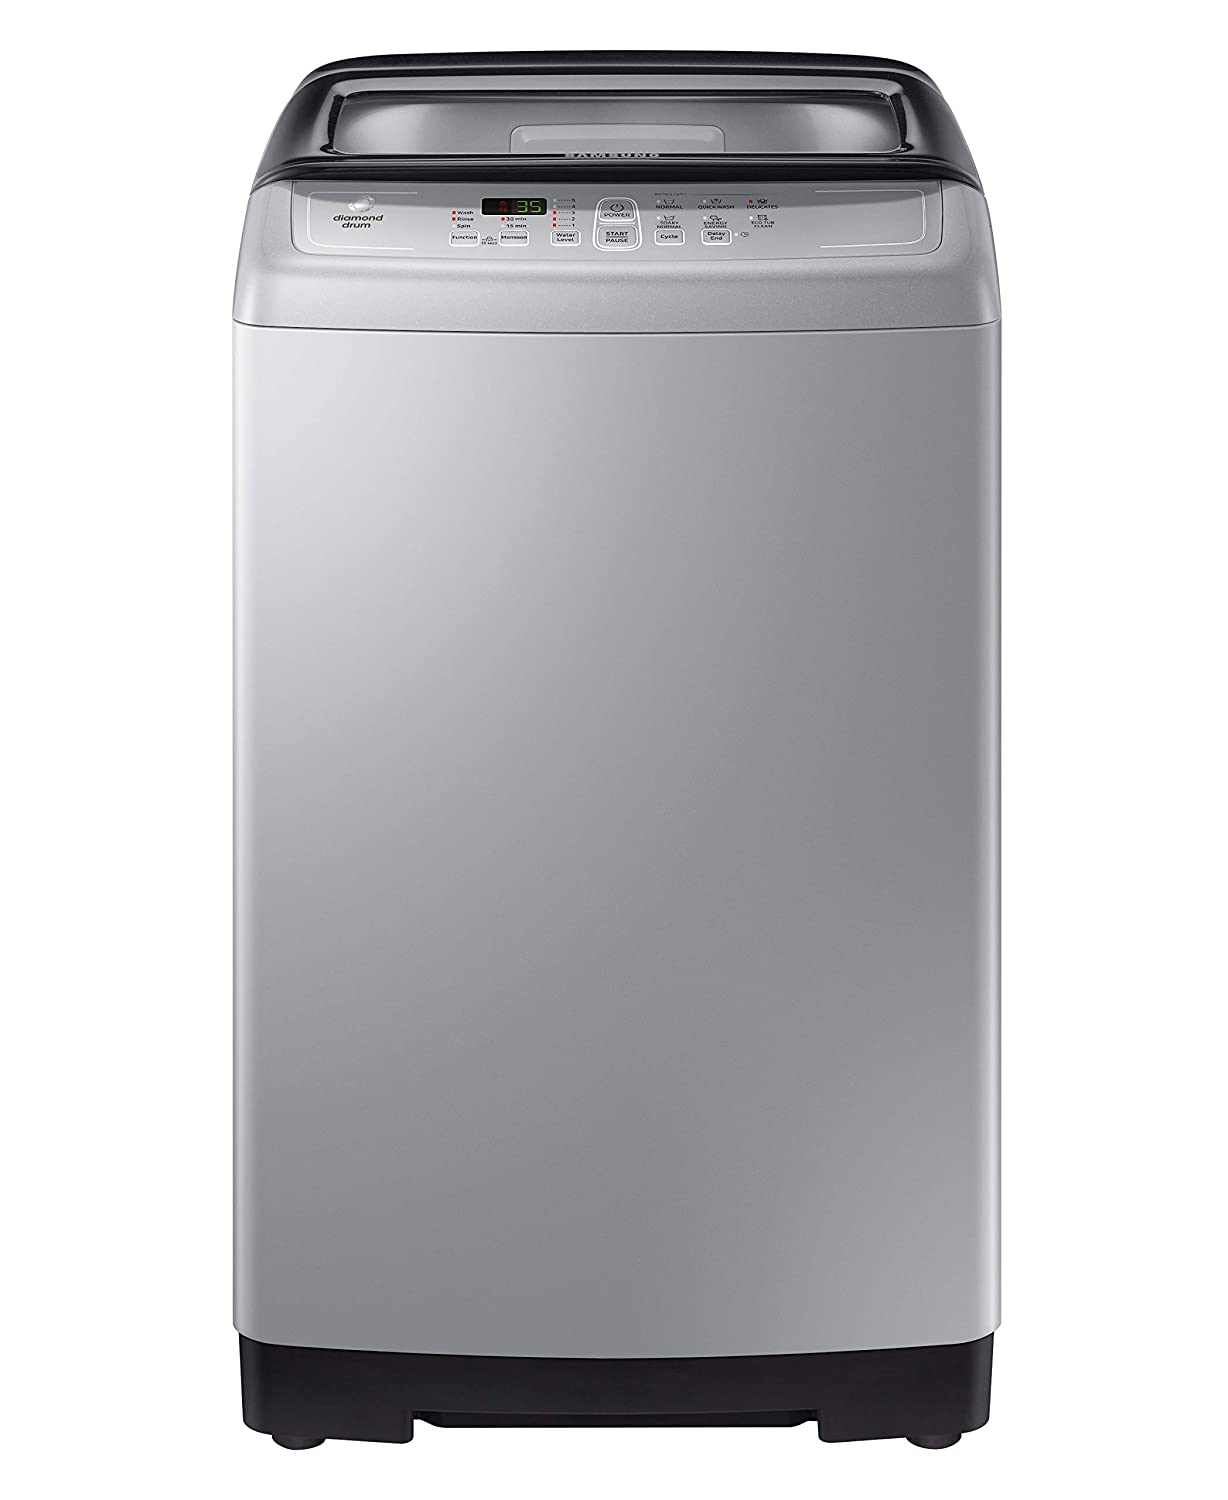 Samsung 6.5 kg Fully Automatic Top Loading Washing Machine  WA65A4002GS/TL, Imperial Silver, Center Jet Technology 